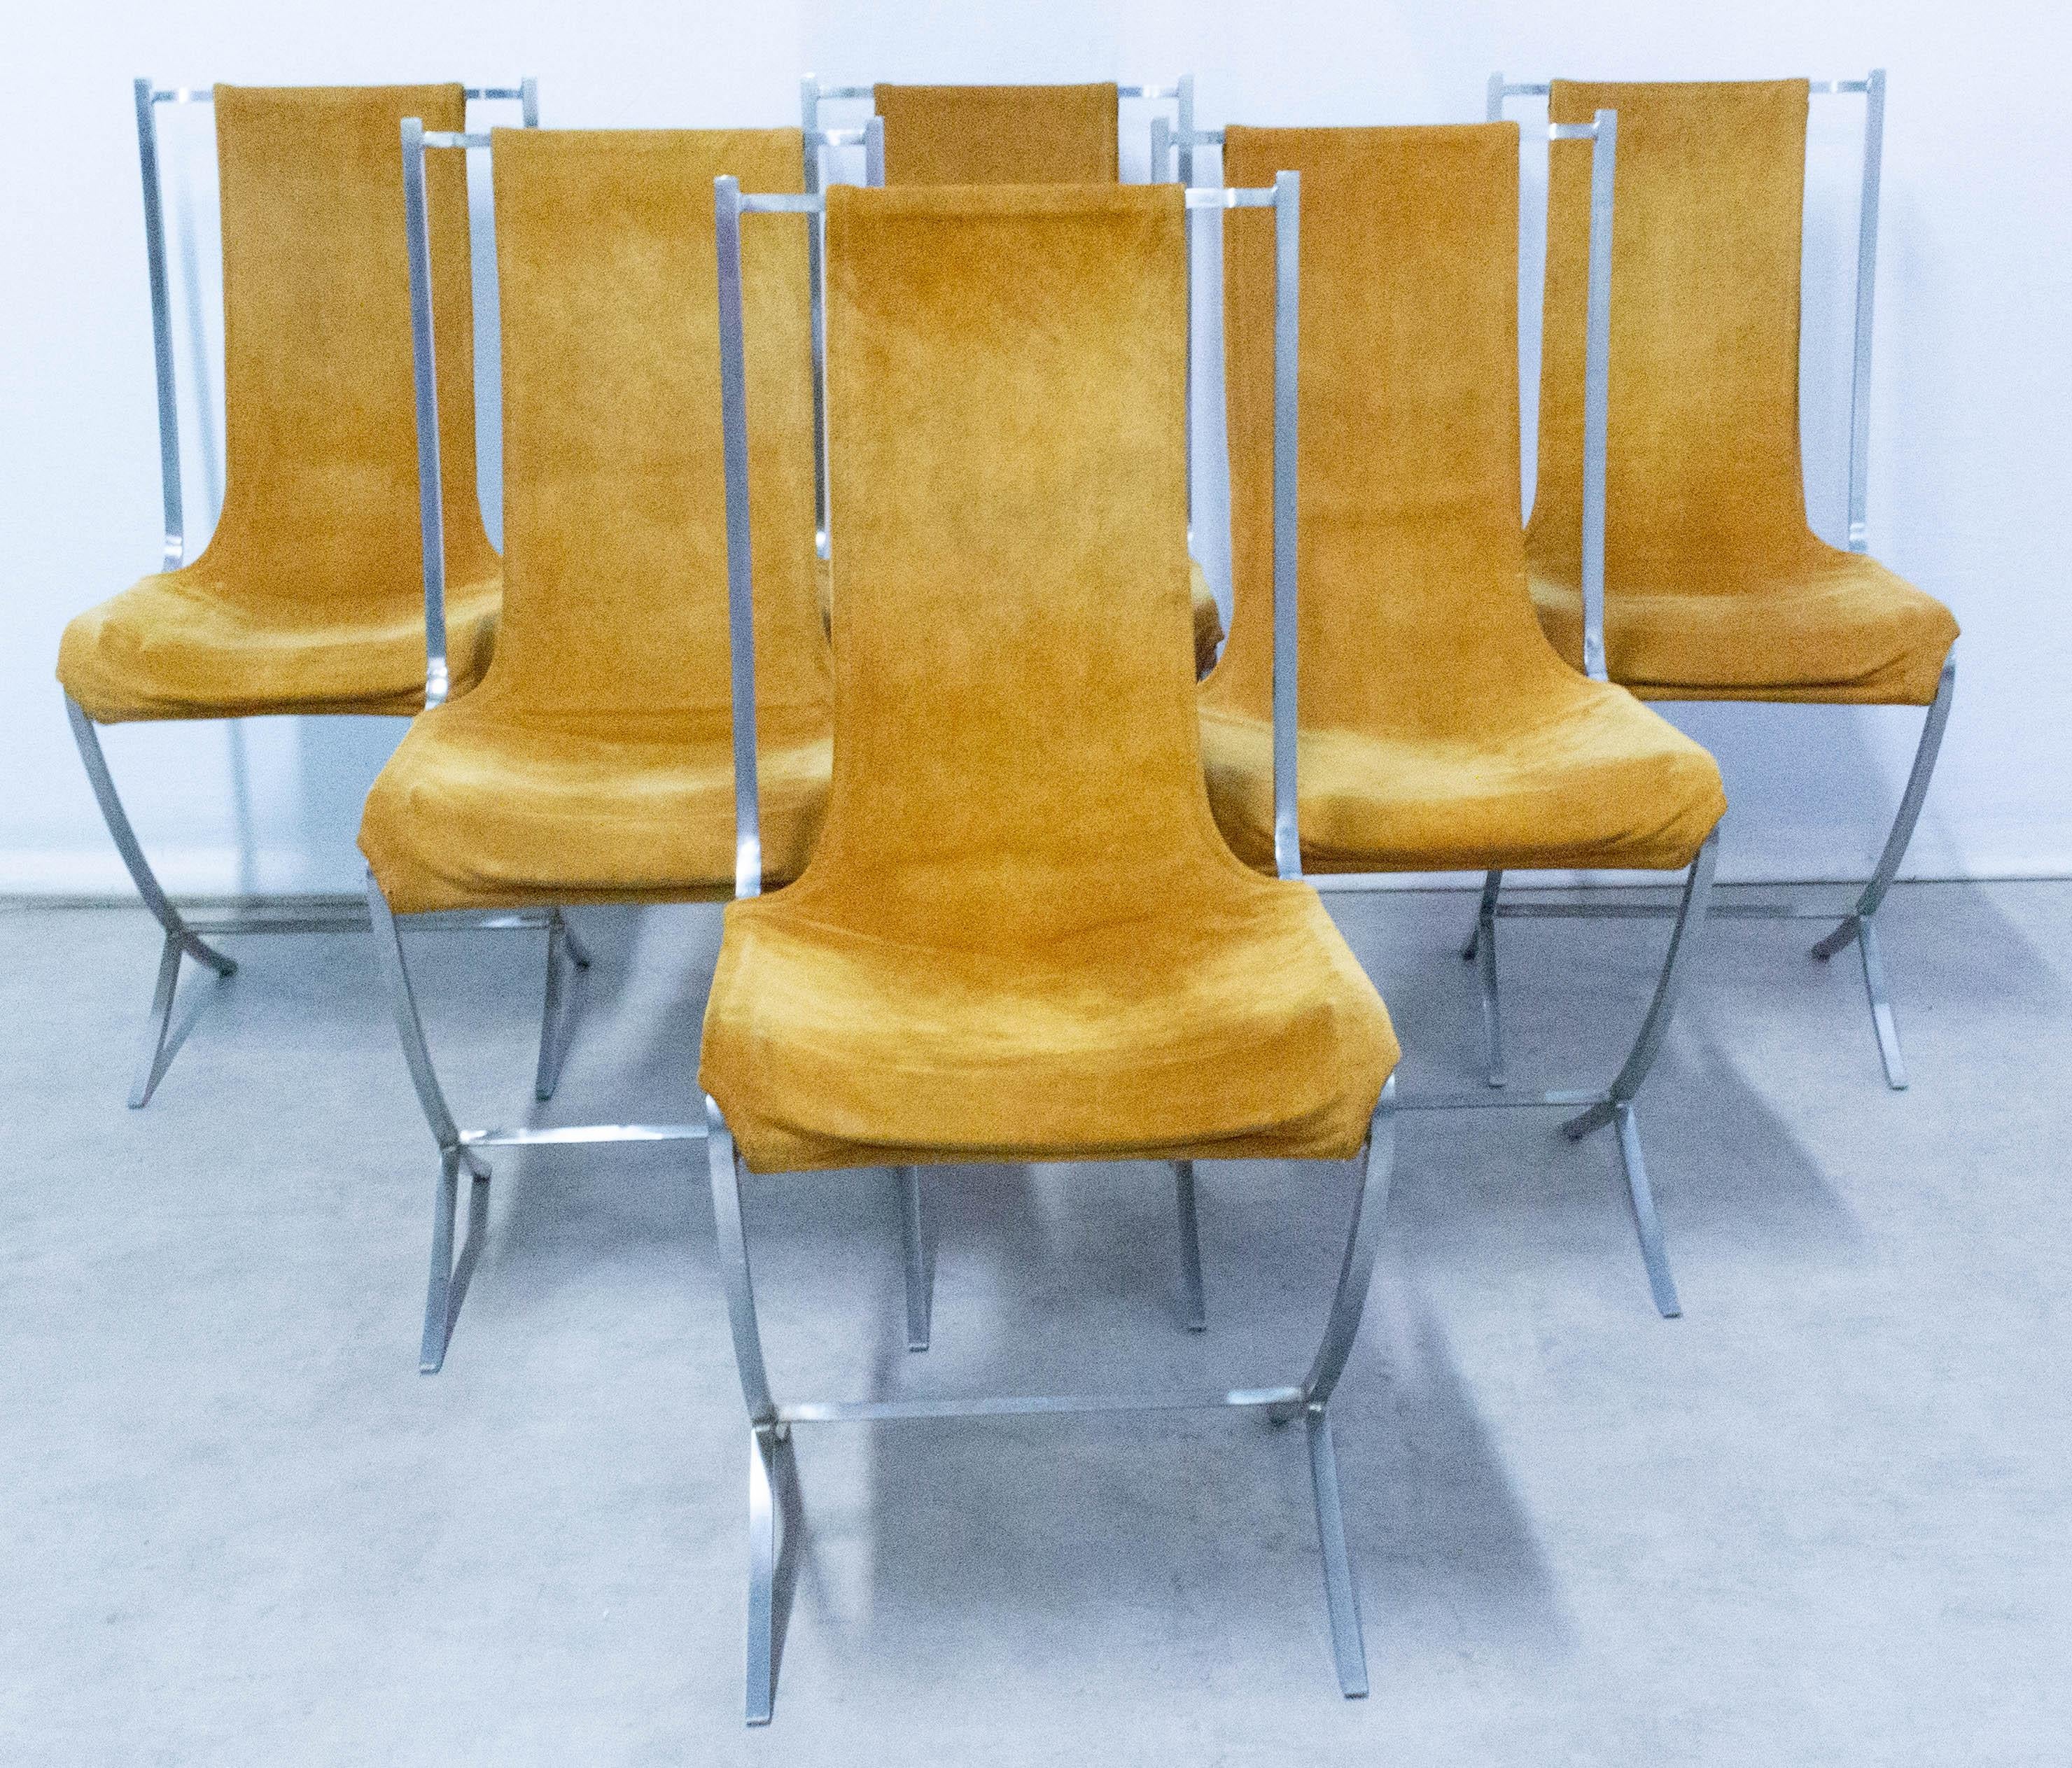 6 chairs of Maison Jansen created by Pierre Cardin
The chairs are of natural color nubuck and chrome,
French, mid-century
Good condition with few signs of use on the nubuck

Shipping:
2 packs: 69/103/48 cm 28 kg each pack.